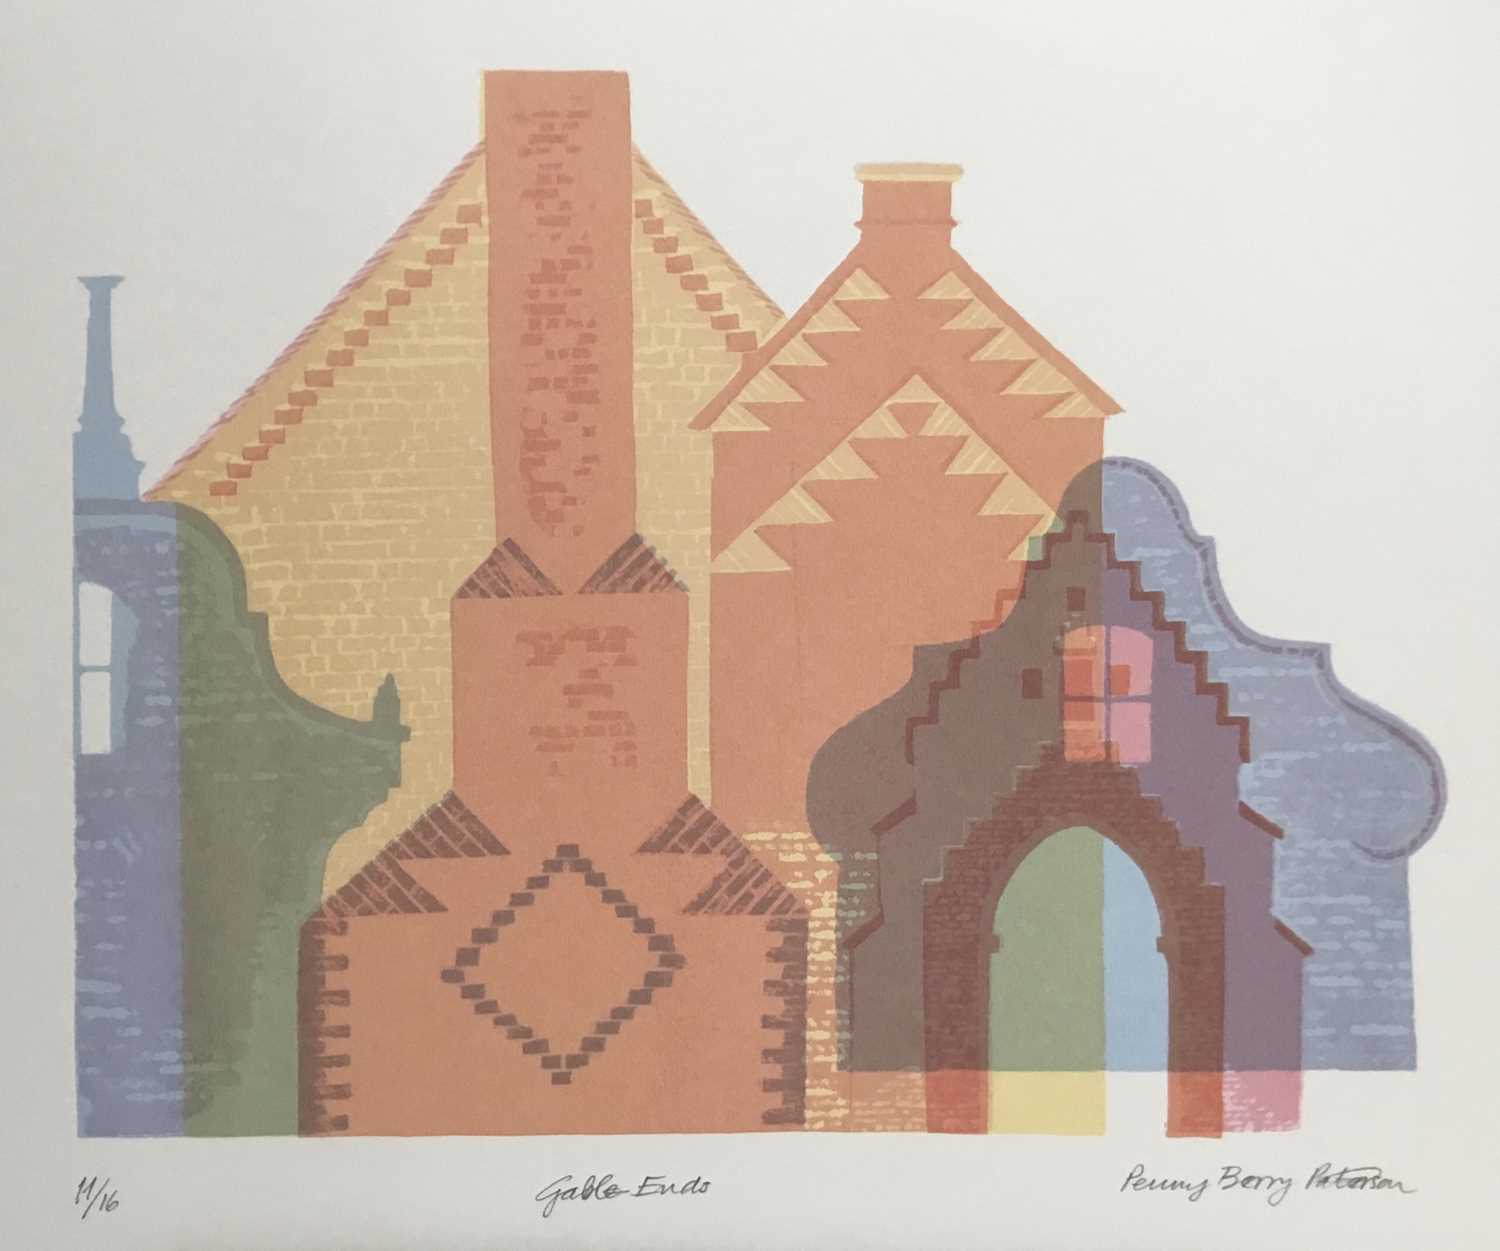 Lot 189 - Penny Berry Paterson (1941-2021) colour print, Gable Ends, signed and numbered 11/16, image 29 x 37cm